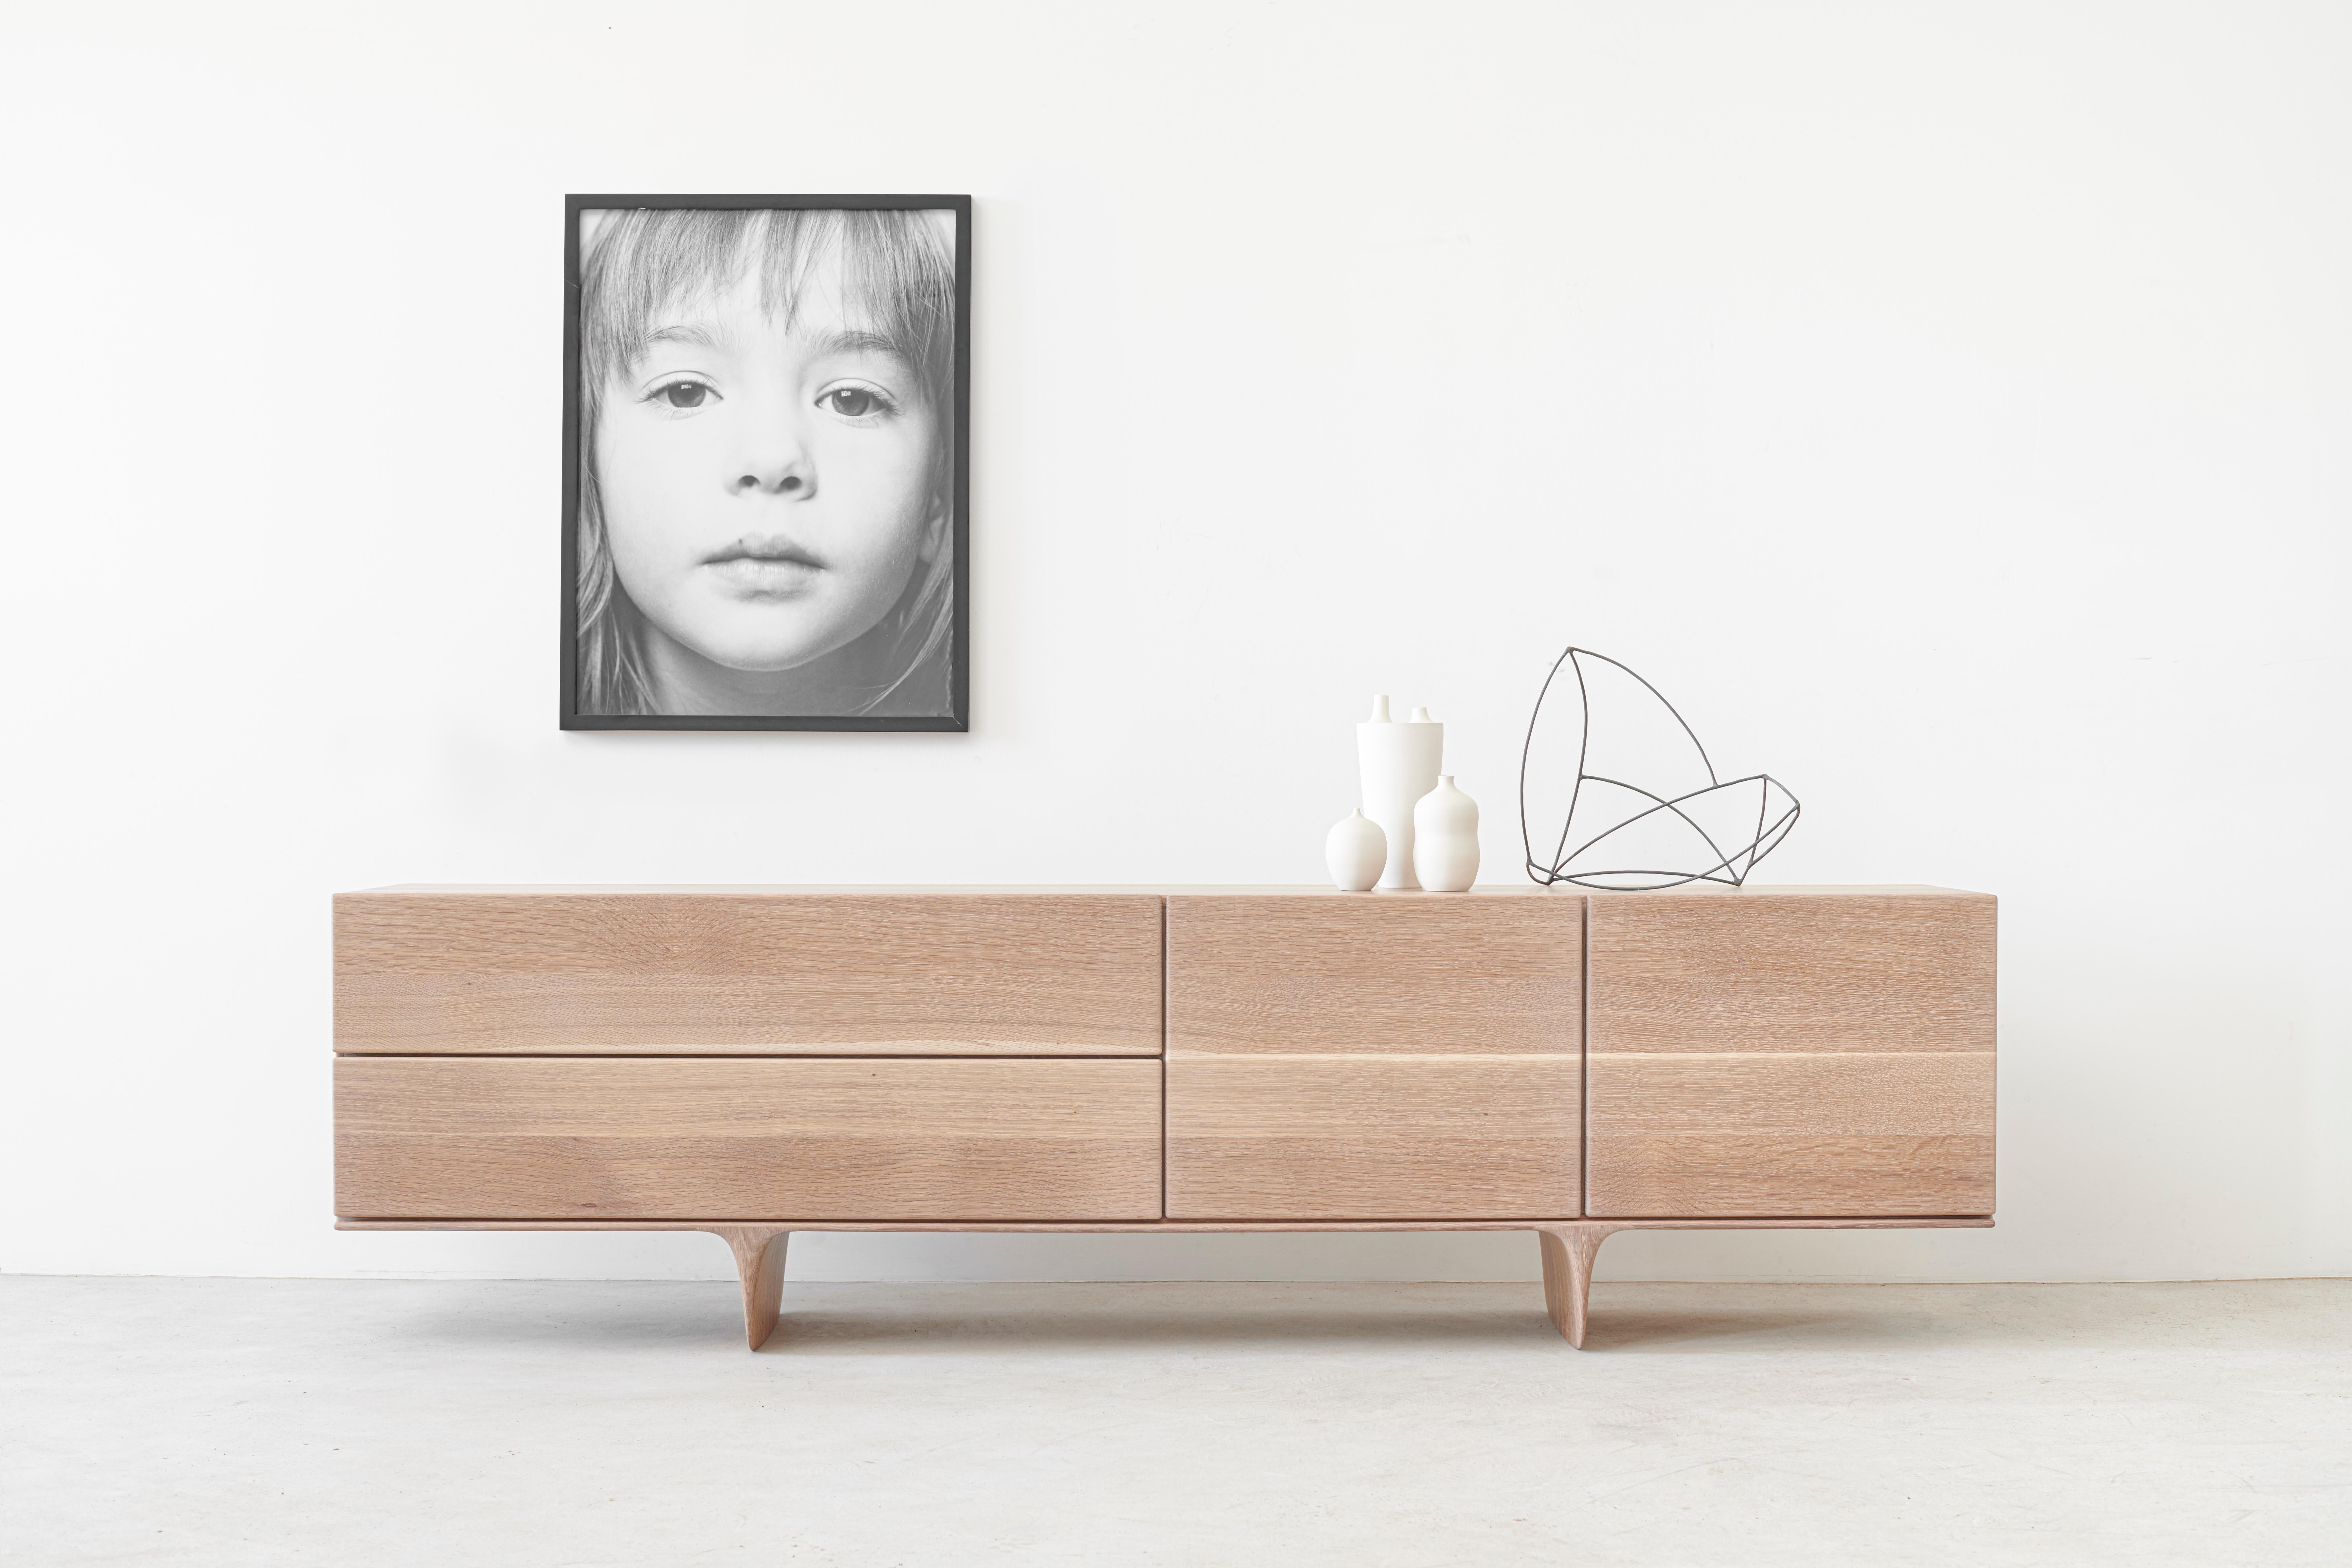 Ennah by Izm design is a versatile design that would be at home in modern, transitional, or traditional settings.
This elegant sideboard features an sculpted base that gives the piece levity and the compound radii continue into all elements of the